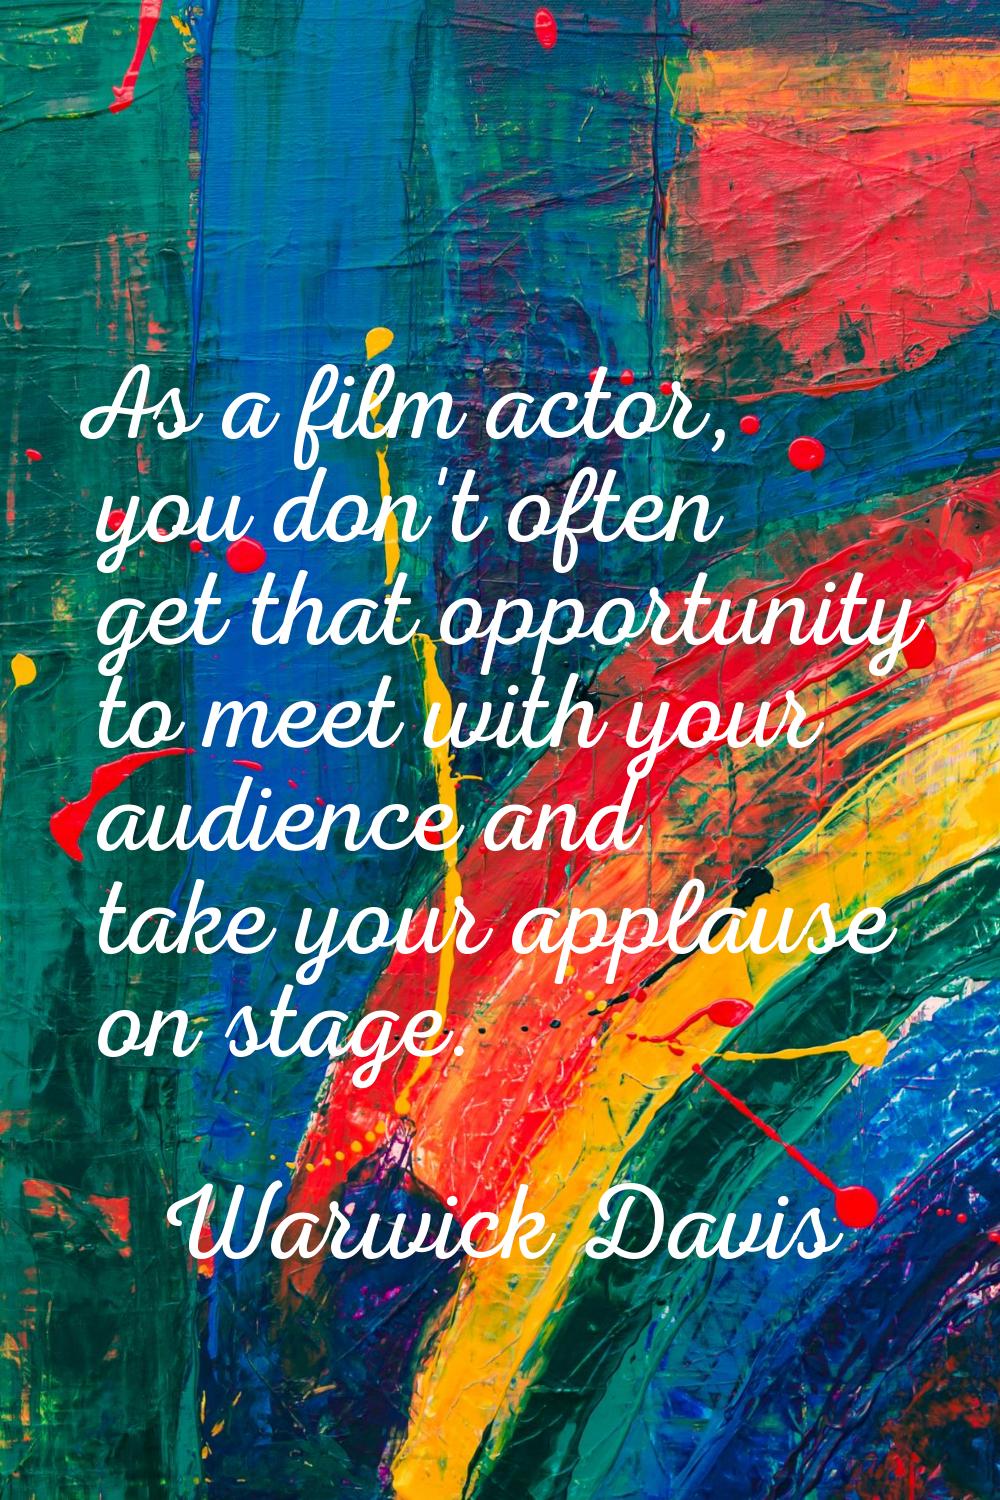 As a film actor, you don't often get that opportunity to meet with your audience and take your appl